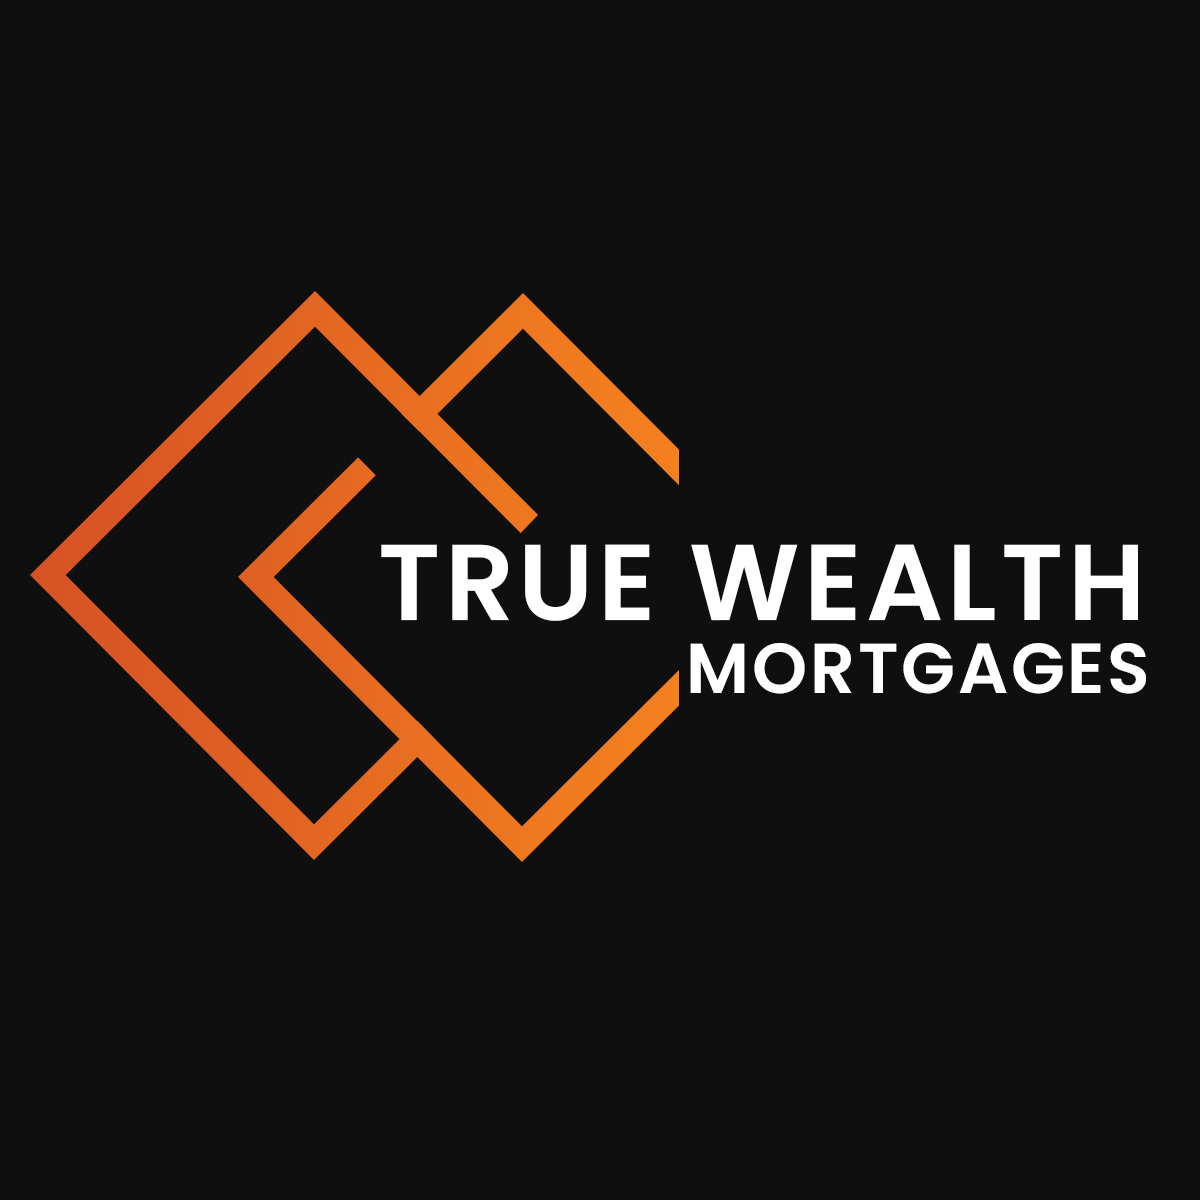 True Wealth Mortgages, Friday, May 20, 2022, Press release picture